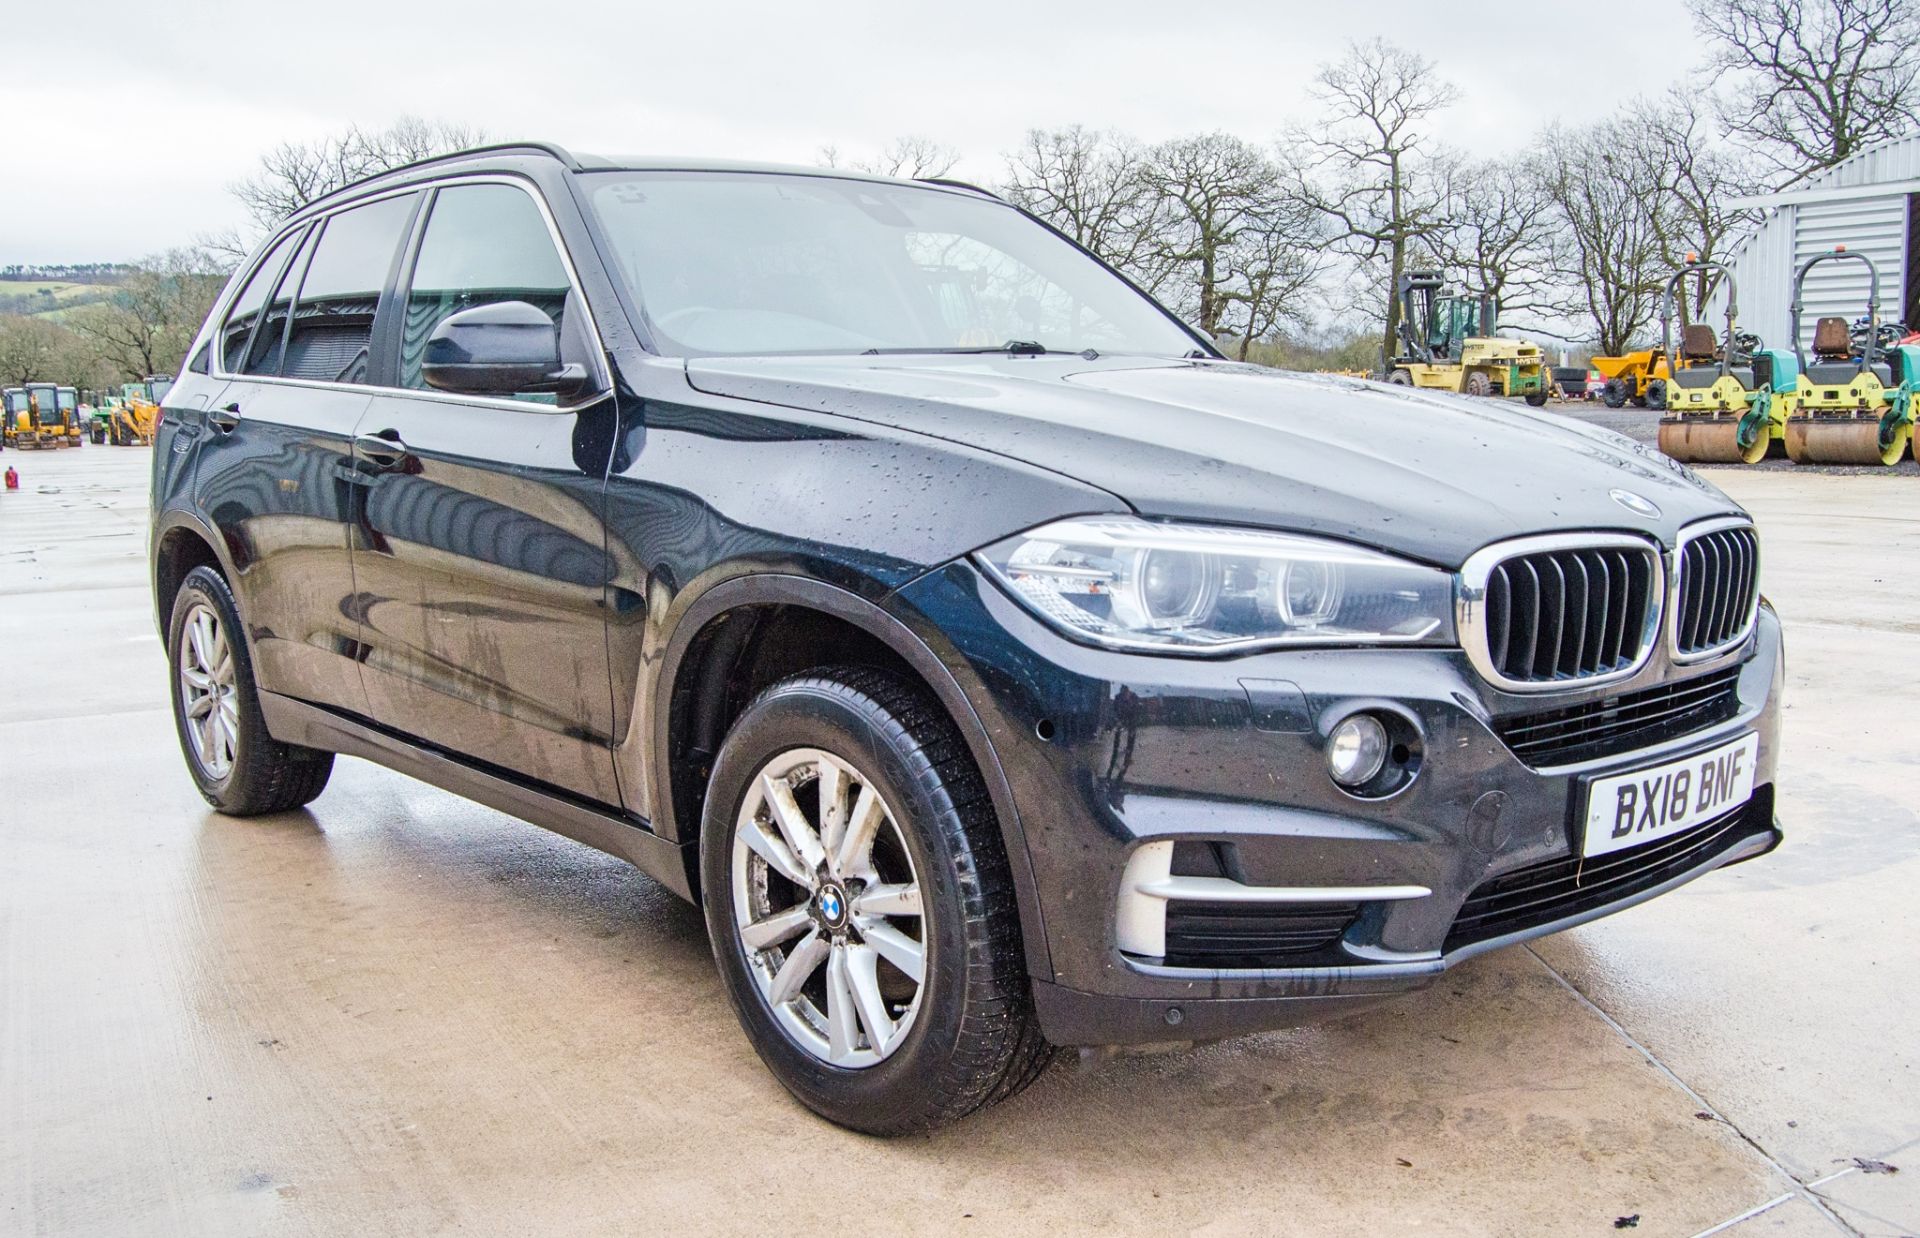 BMW X5 XDRIVE 30D 2999cc diesel automatic estate car EX POLICE Registration Number: BX18 BNF Date of - Image 2 of 32